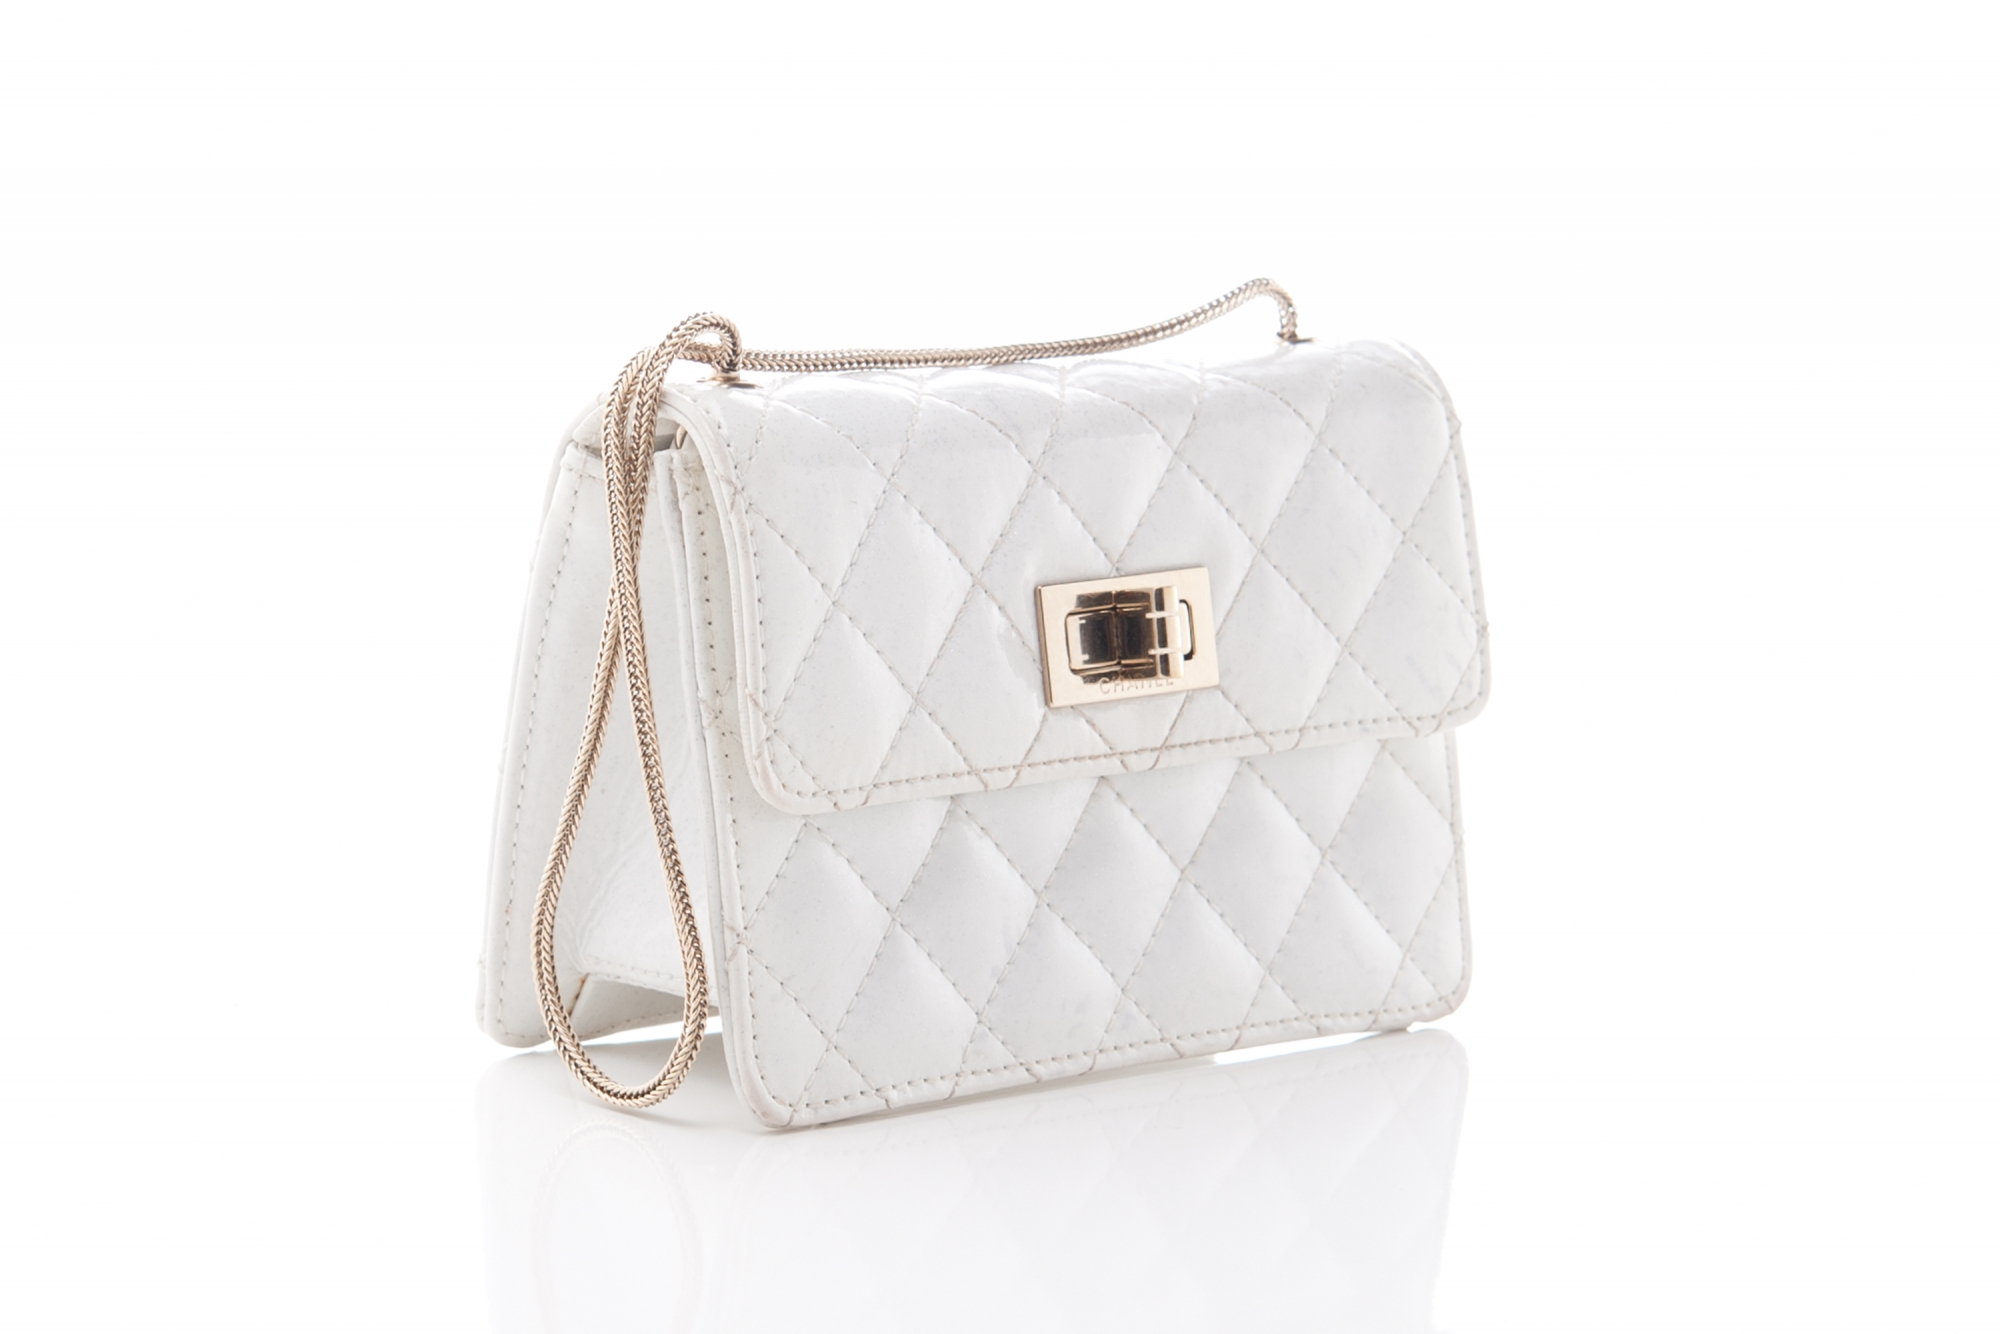 Chanel White Quilted Patent Leather 2.55 Reissue Mini Flap Bag La Doyenne